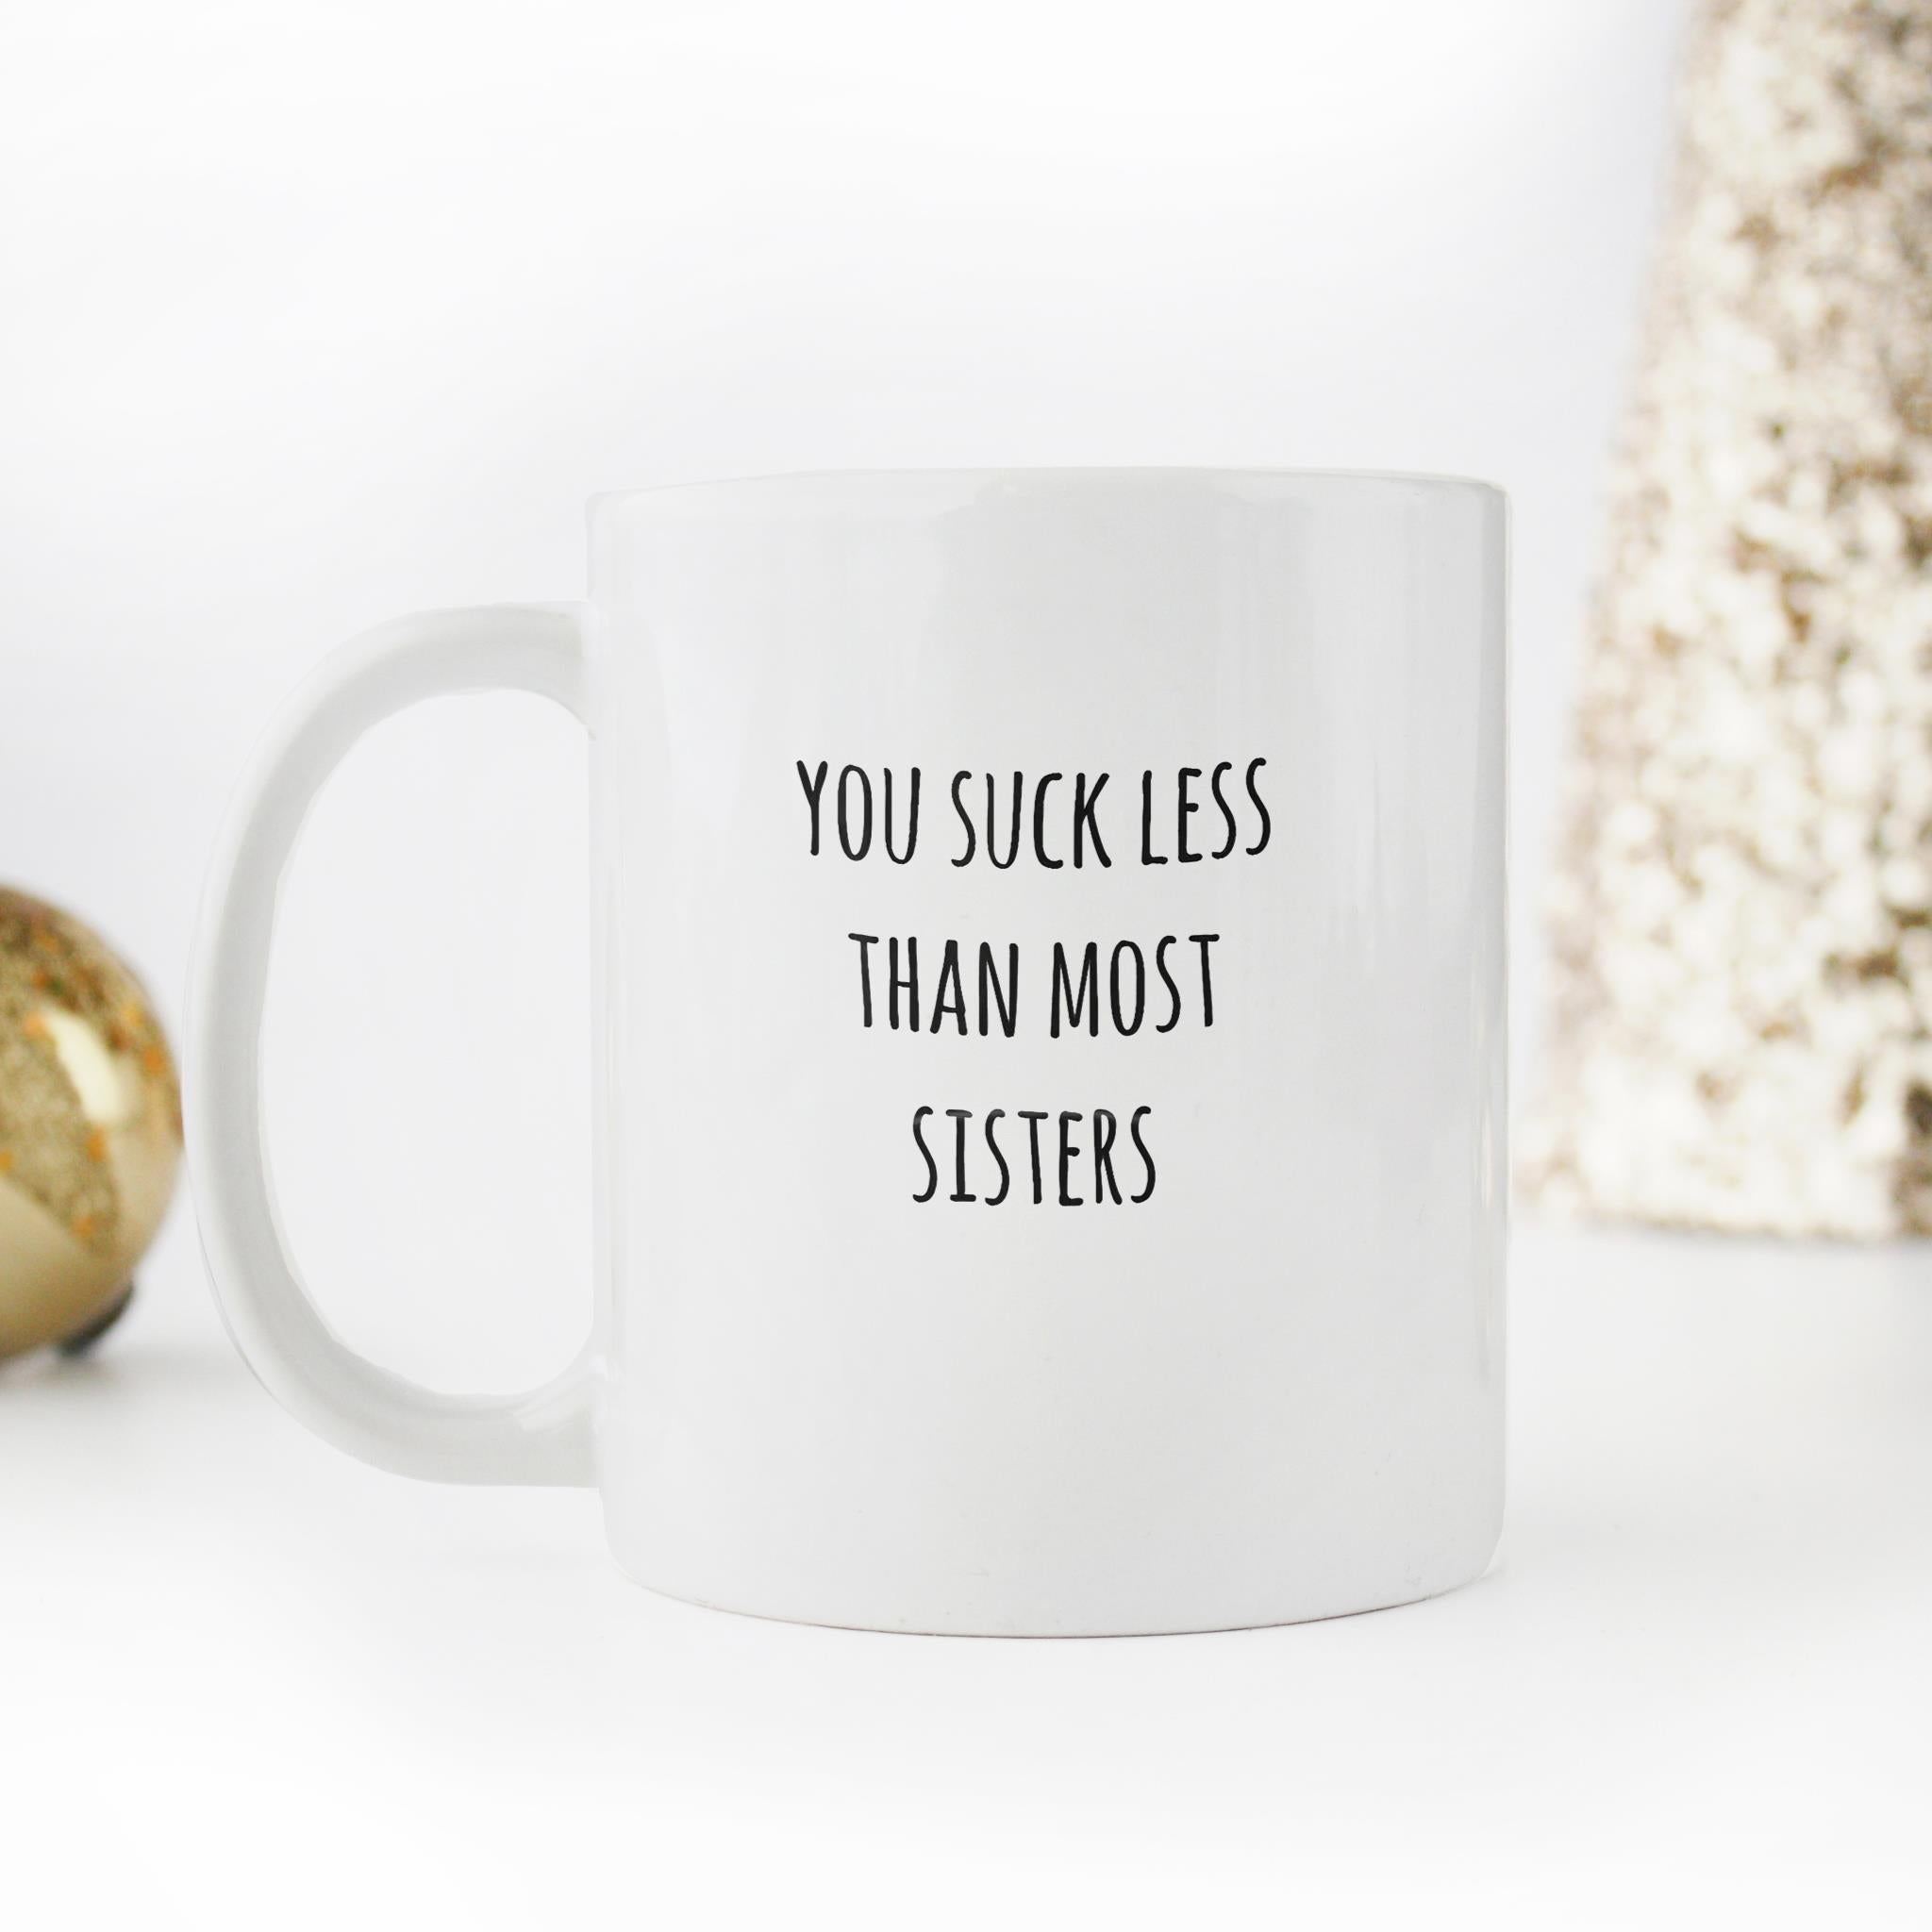 Skitongifts Funny Ceramic Novelty Coffee Mug You Suck Less Than Most Sisters, You Suck Less GnVL93M